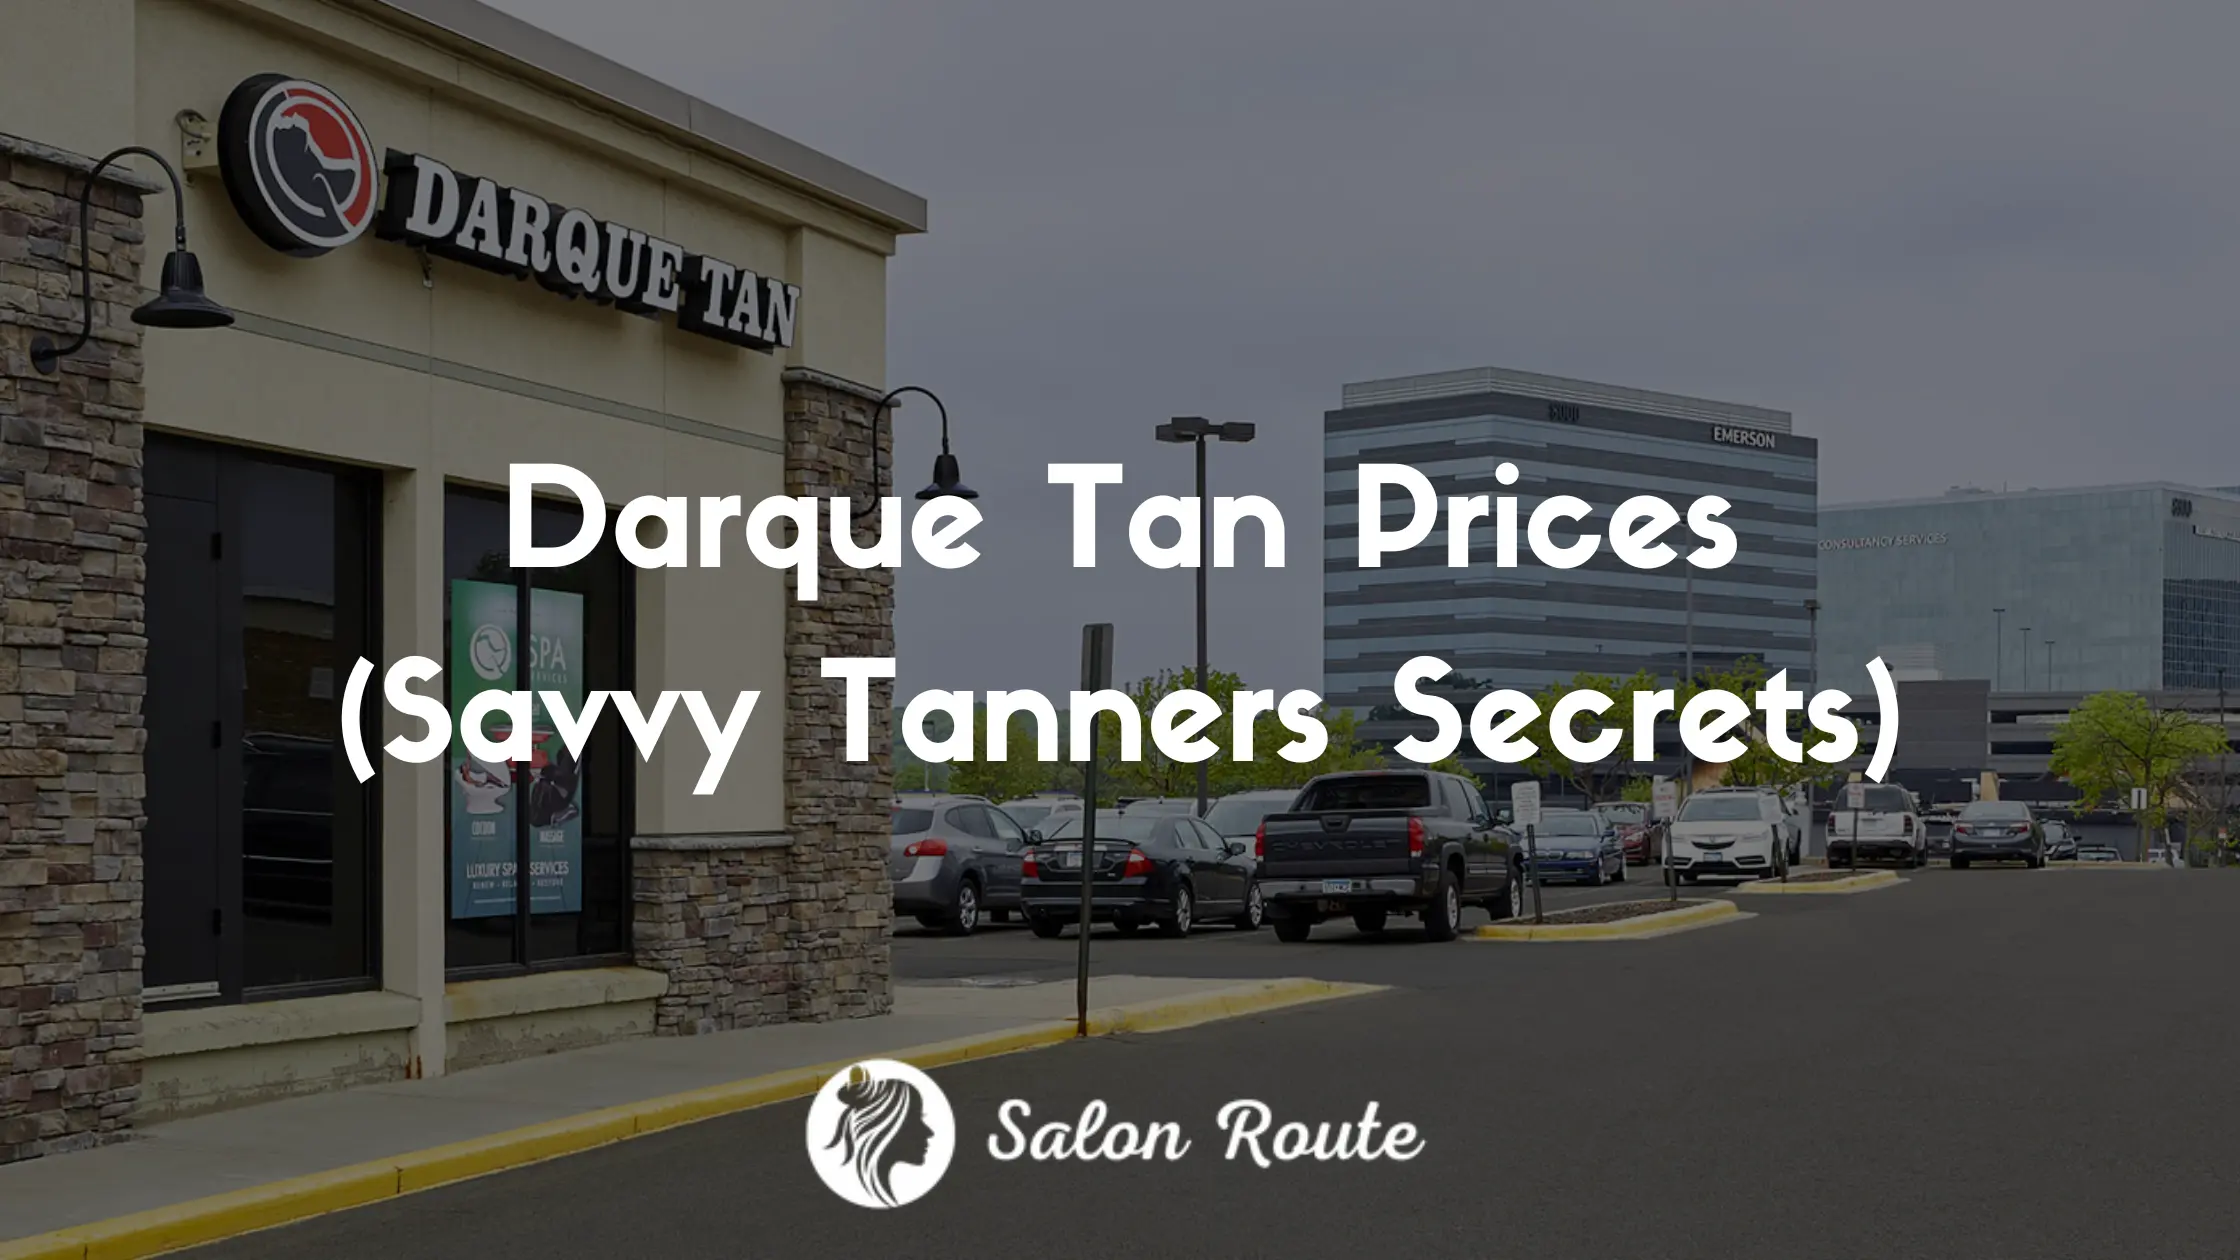 Darque Tan Prices (Savvy Tanners Secrets)